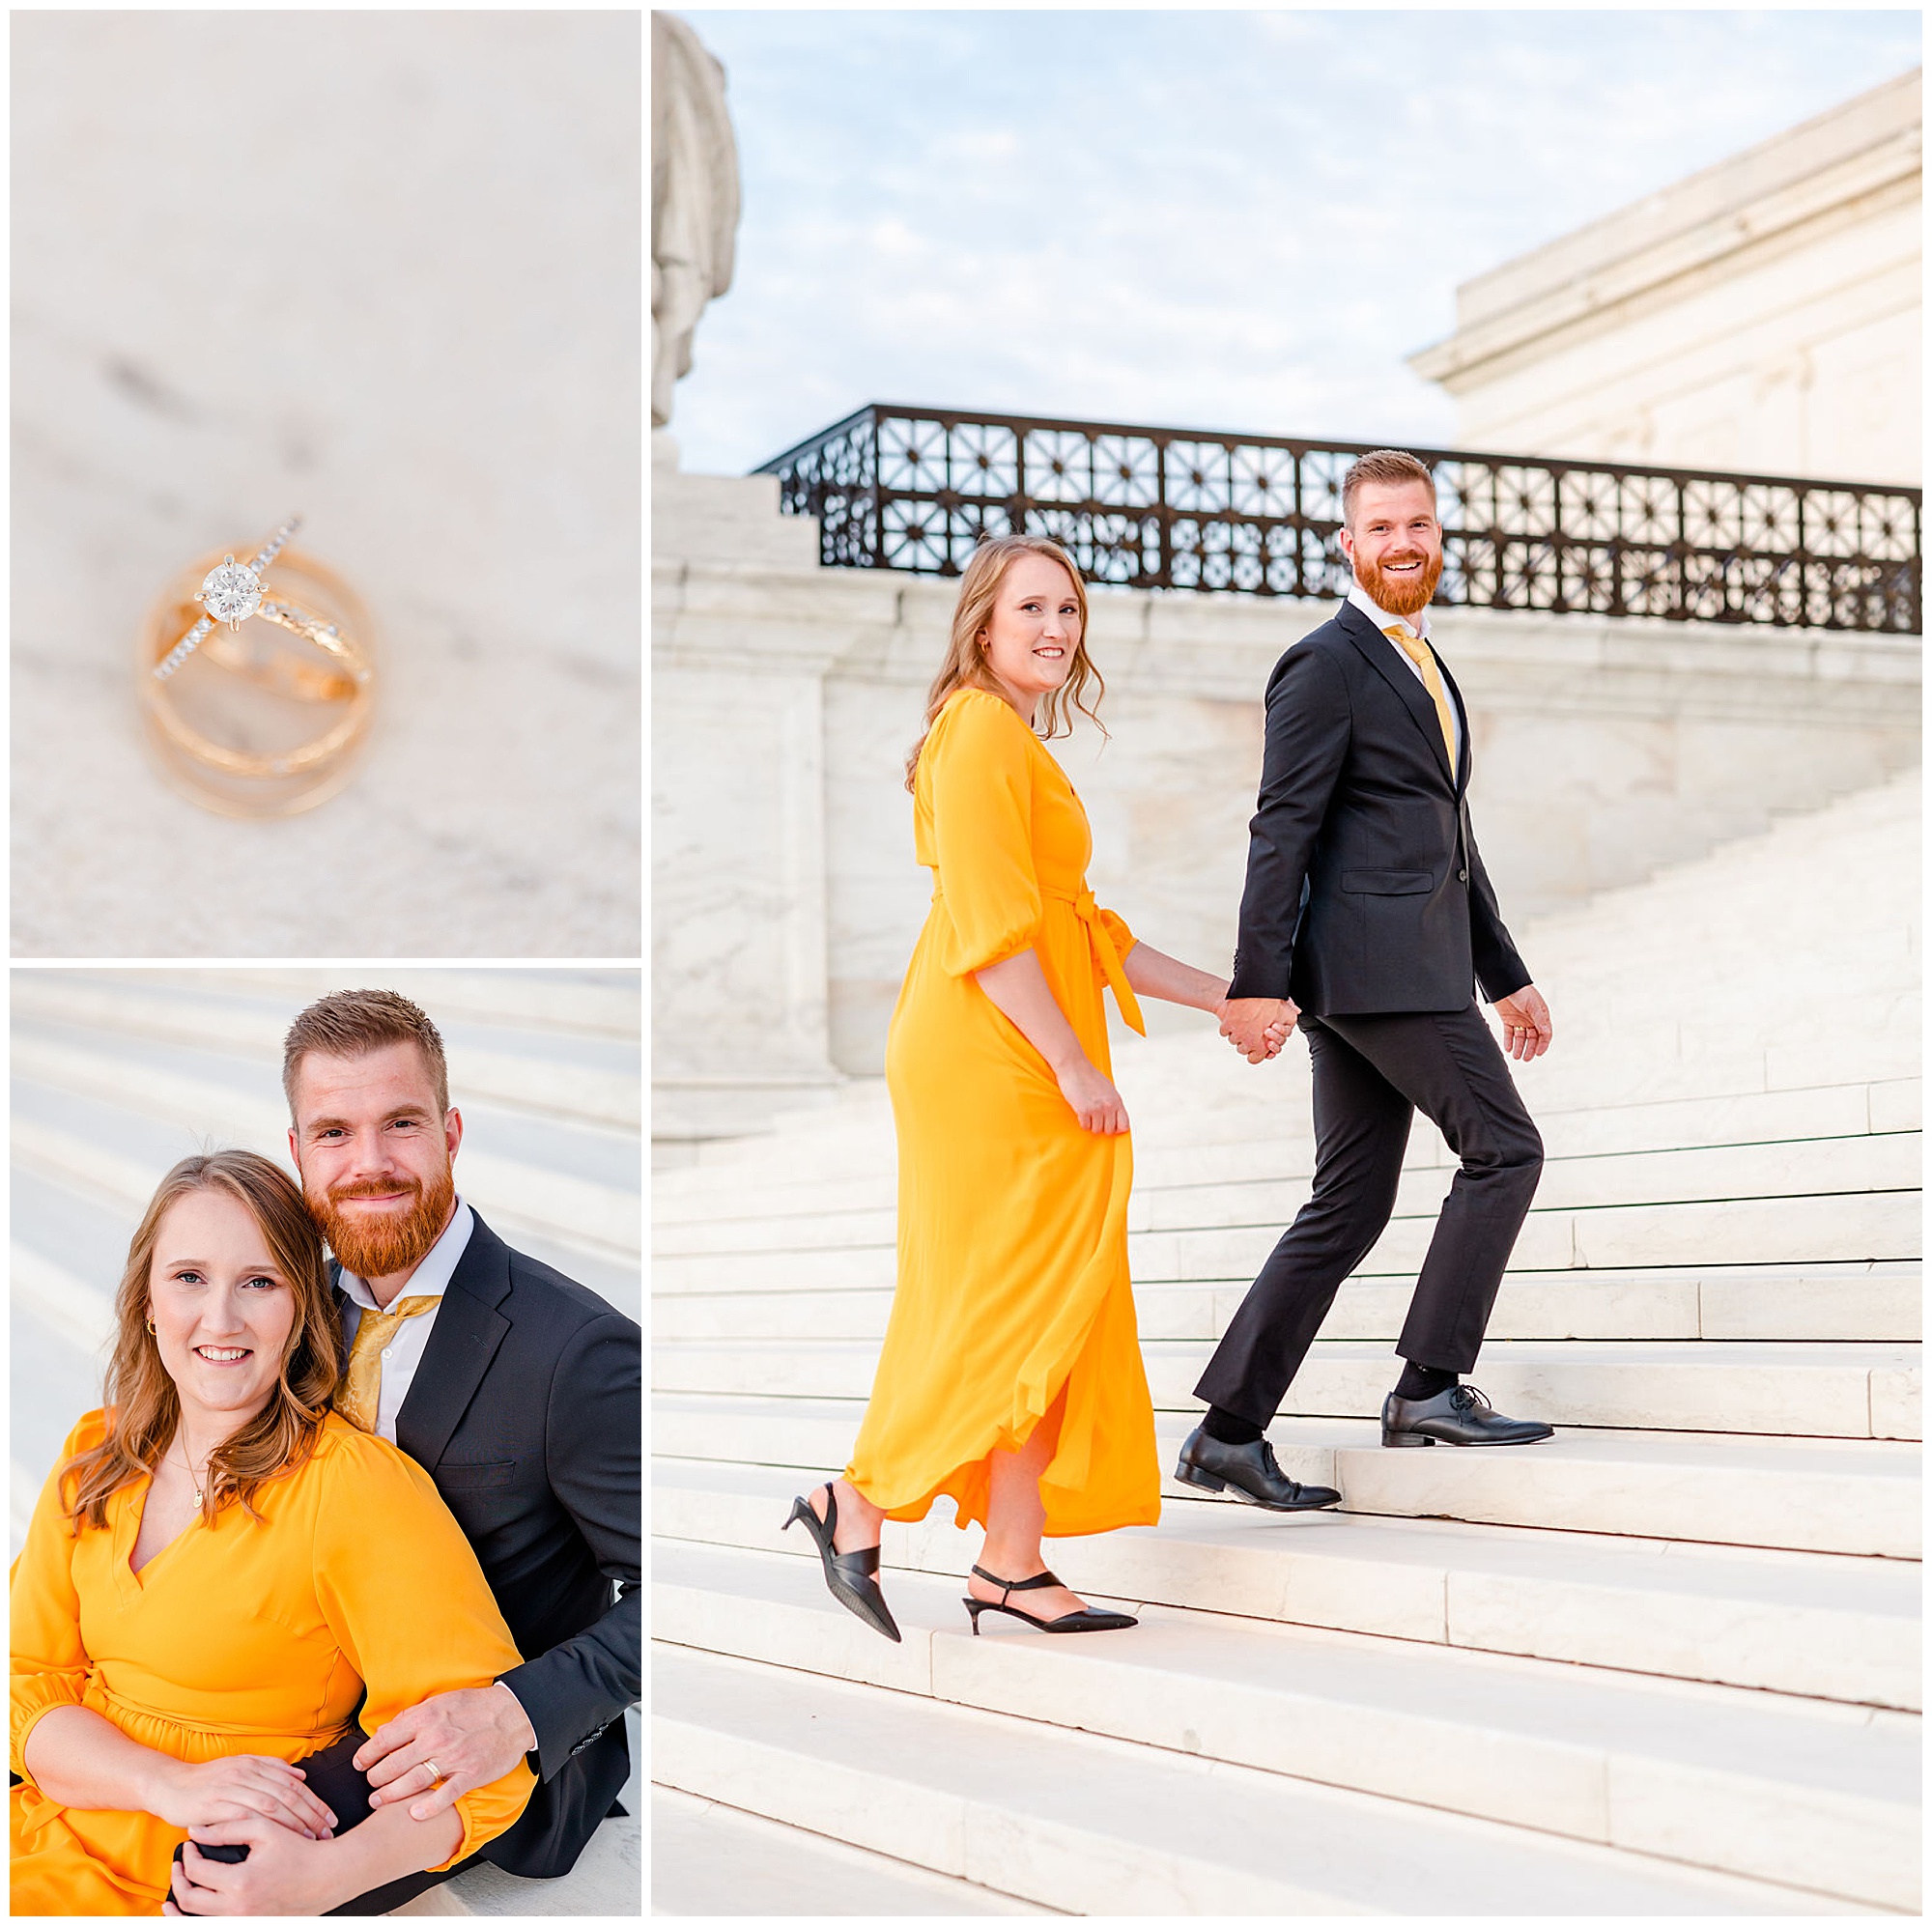 glowing Capitol Hill elopement portraits, Capitol Hill Washington DC, DC elopement portraits, DC elopement photographer, DC wedding photographer, DC portrait photographer, DC photographer, Capitol Hill portraits, autumn portraits, Capitol Hill photographer, Rachel E.H. Photography, couple walking up marble steps, rose gold wedding rings